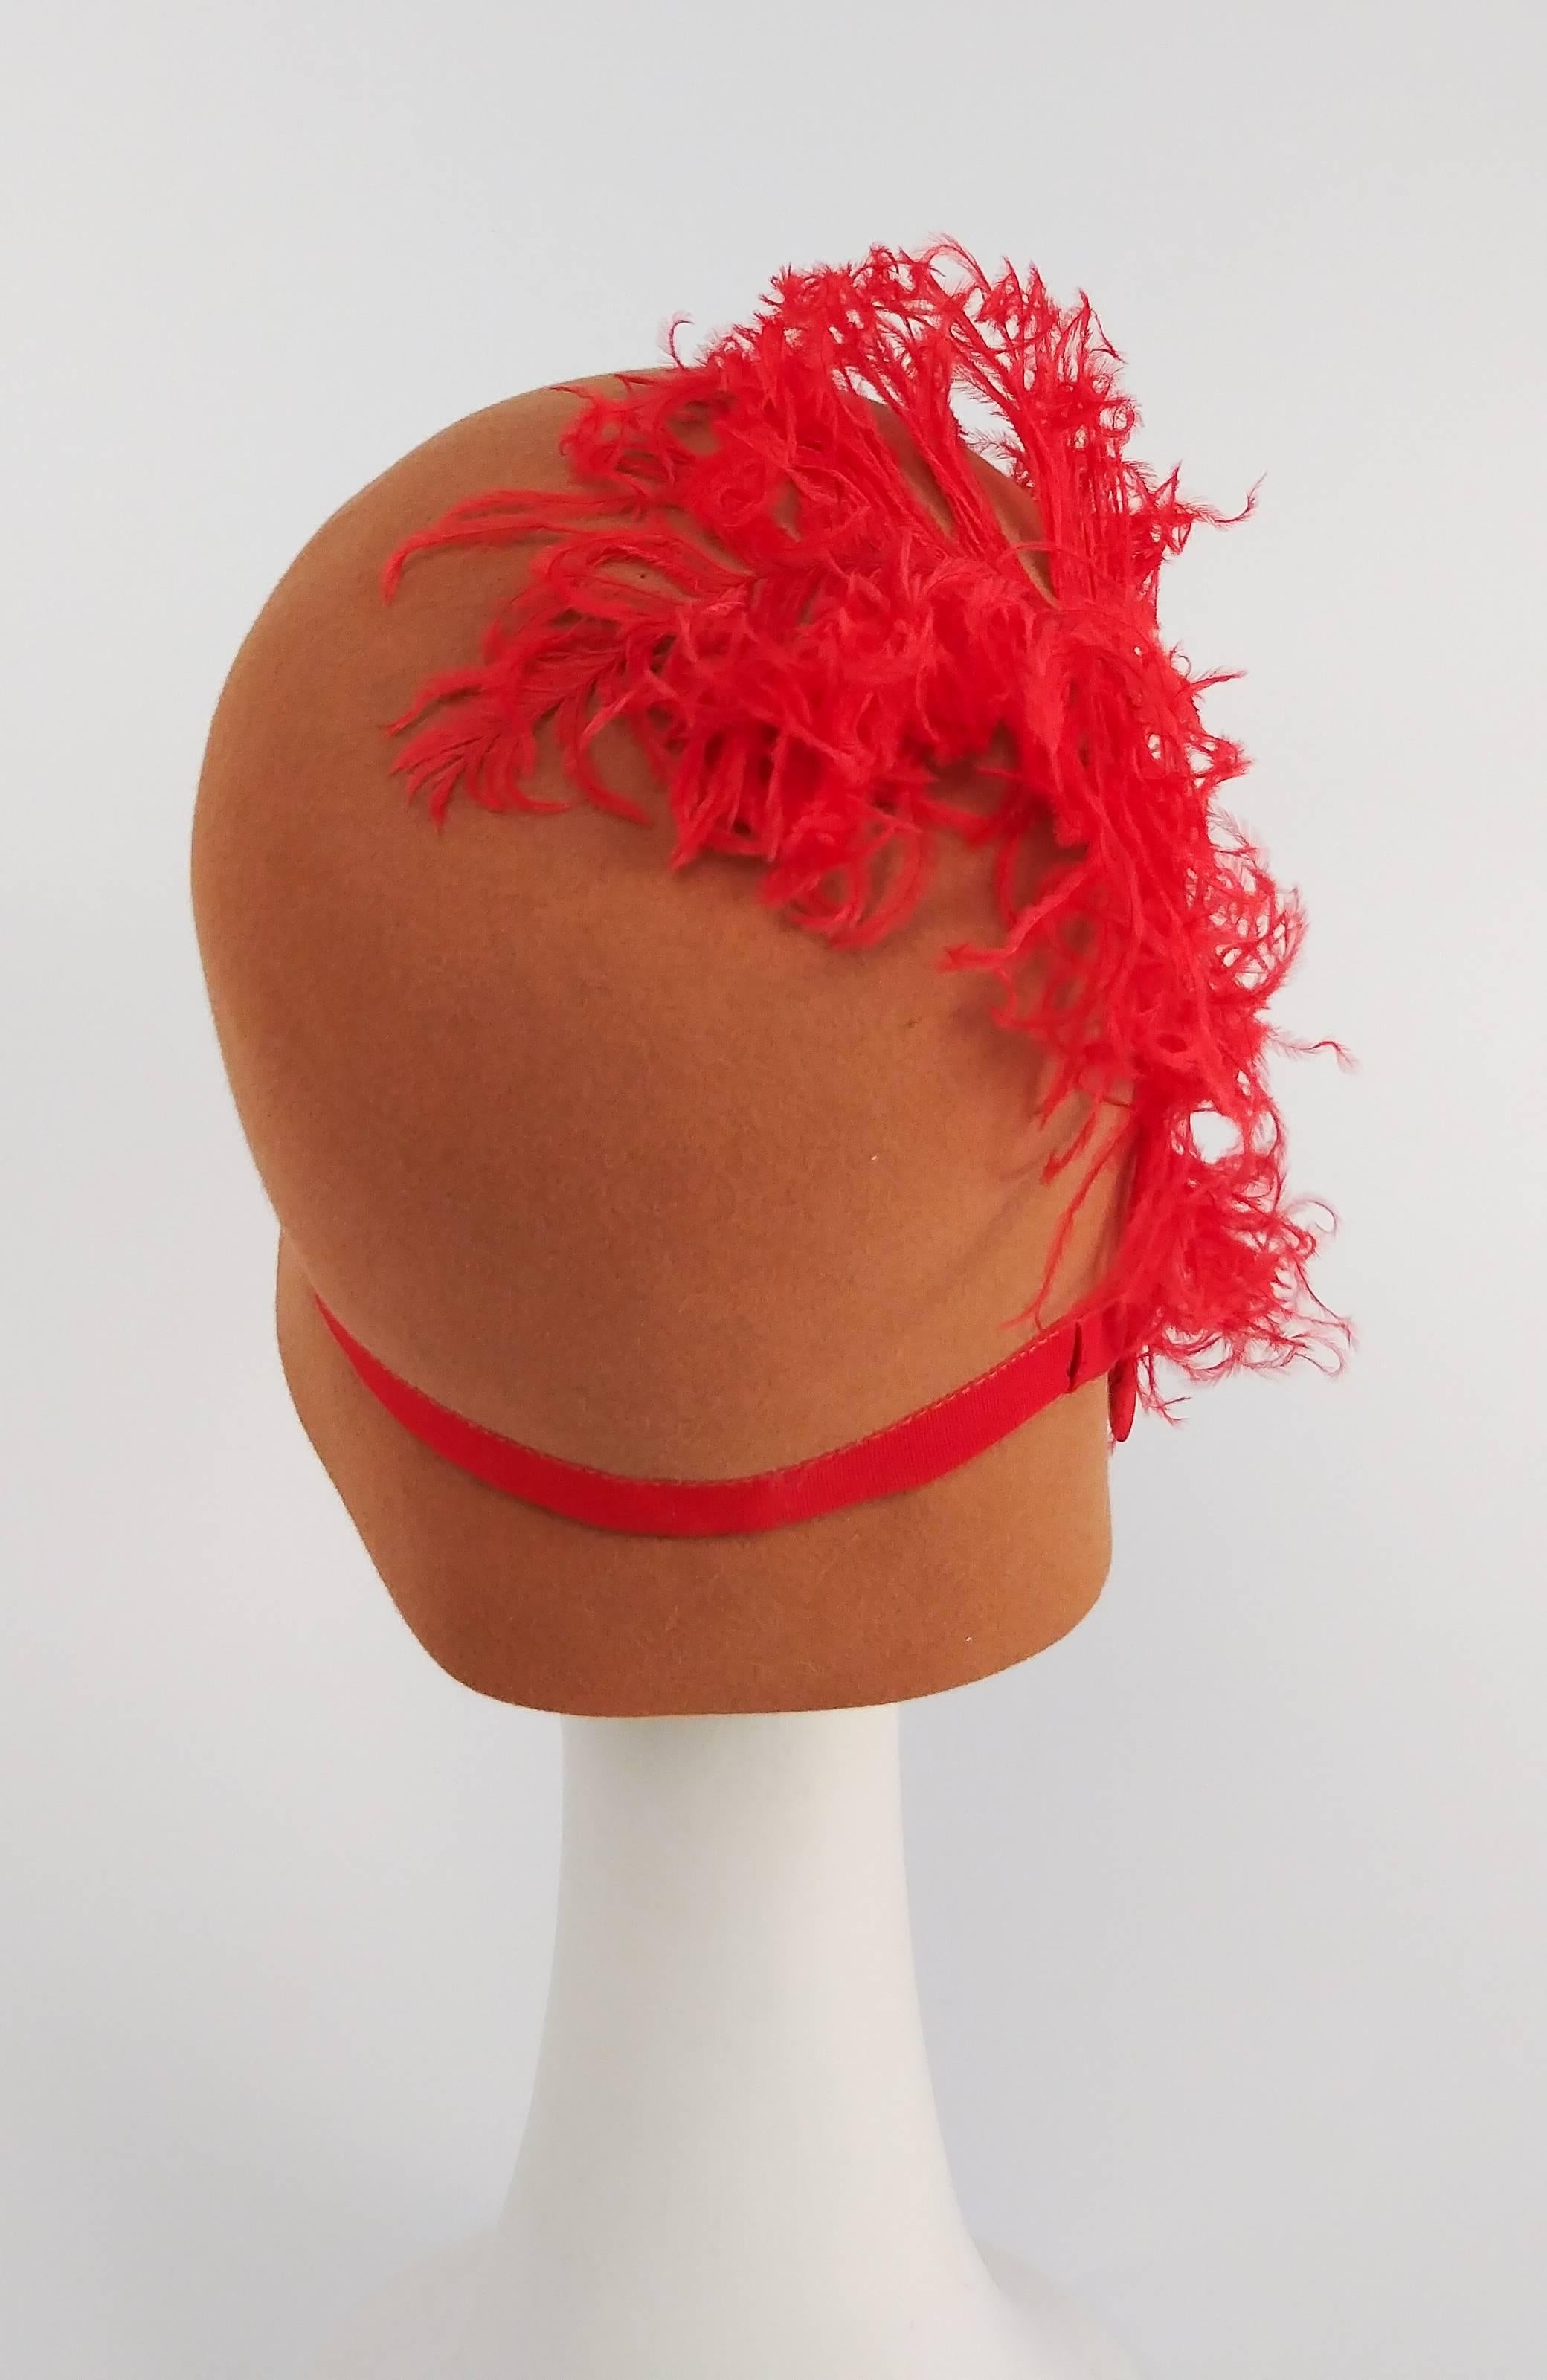 1960s Burnt Umber Cloche Hat w/ Red Feather. 1920s throwback hat from the 1960s. Hat dips down low on one side, trimmed with a red grosgrain bow and curled feather. 22